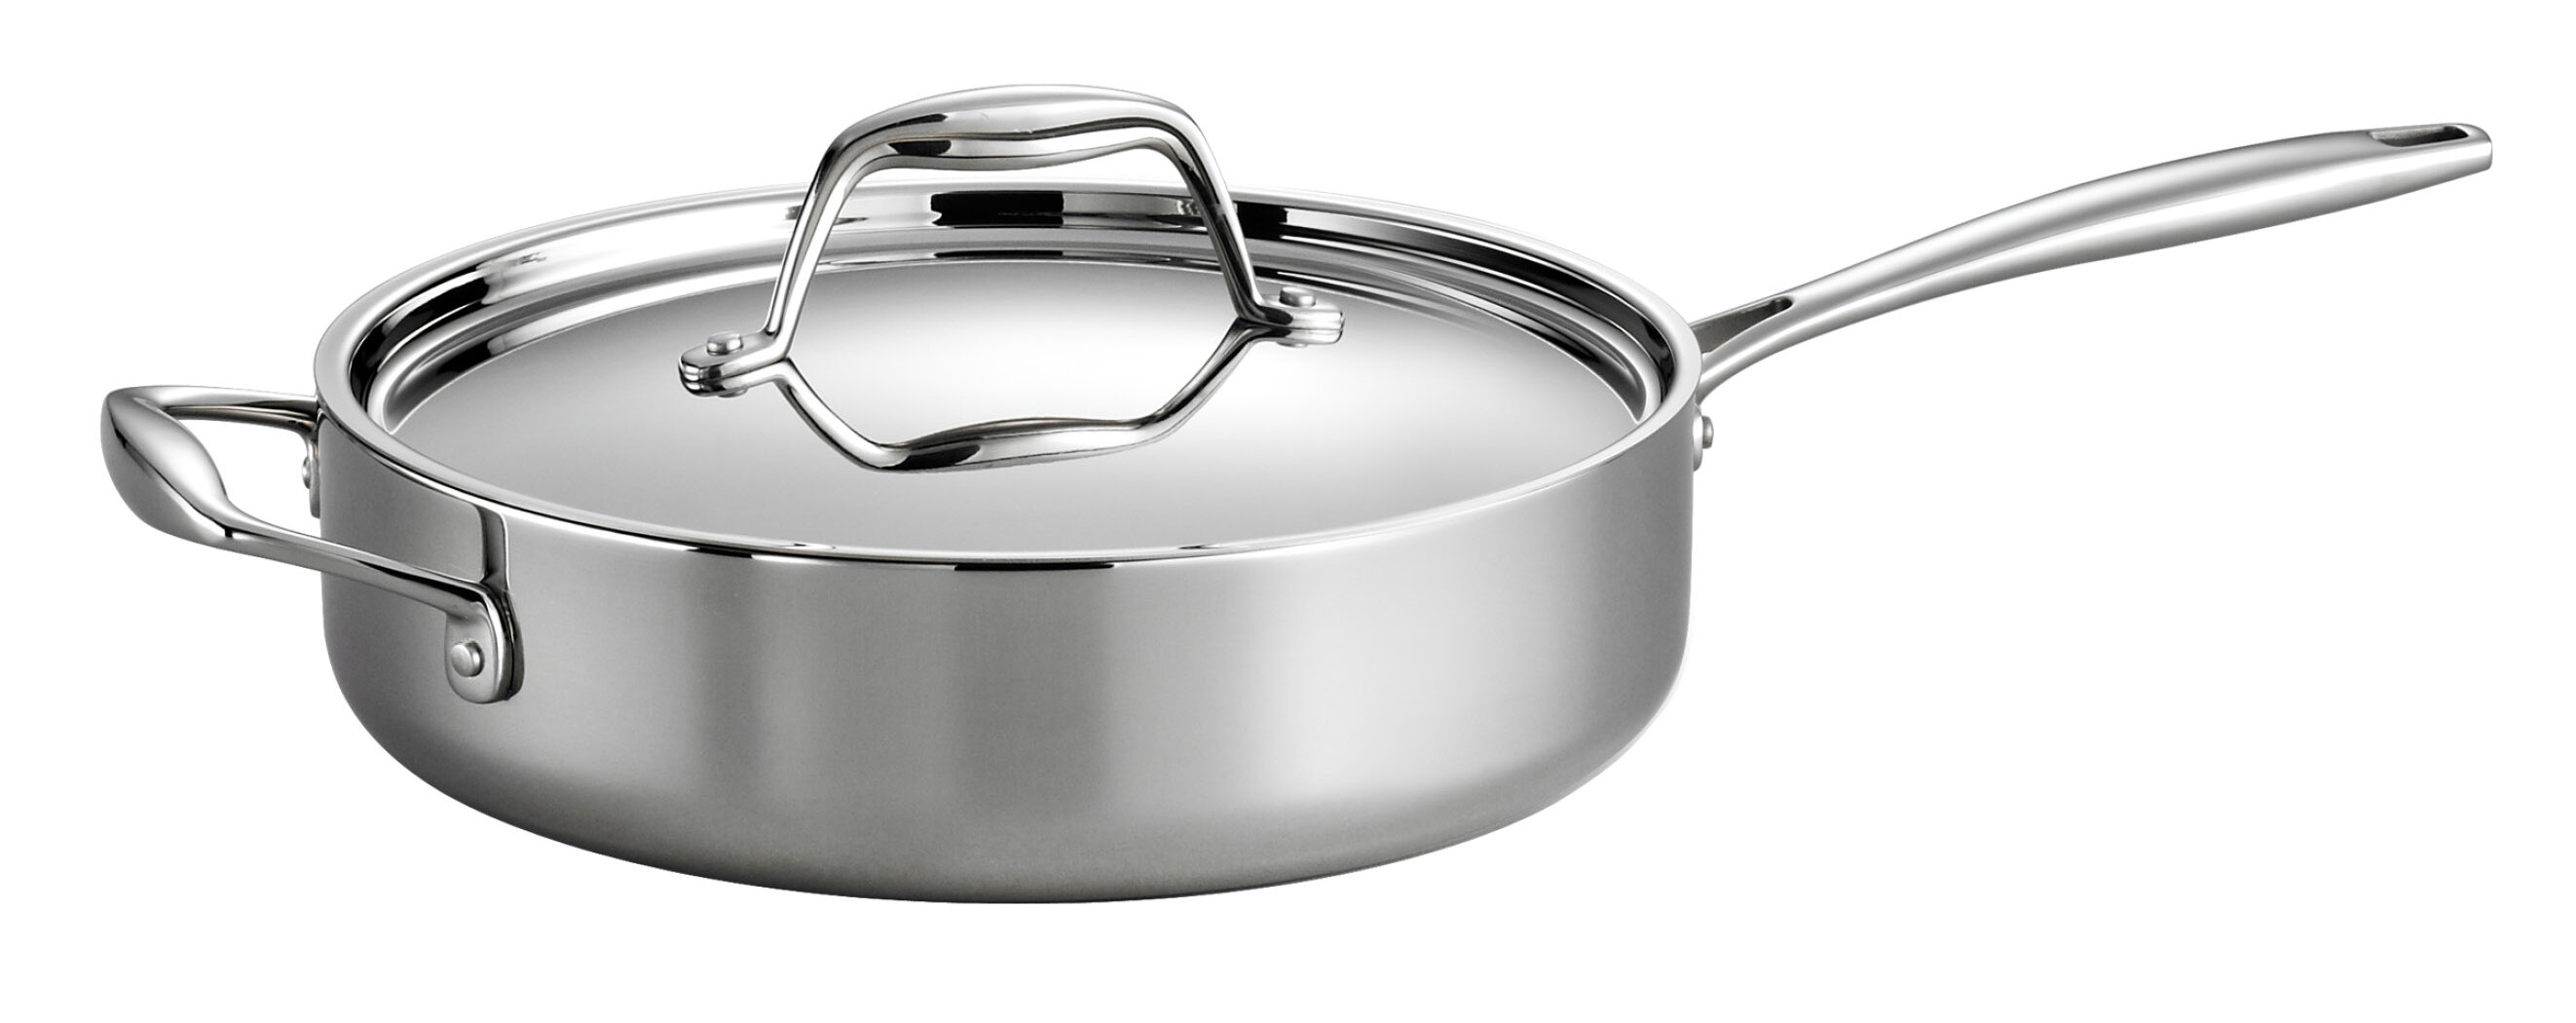 Tramontina Gourmet Tri-Ply Clad 3 Quarts Non-Stick Saute Pan with Lid &  Reviews